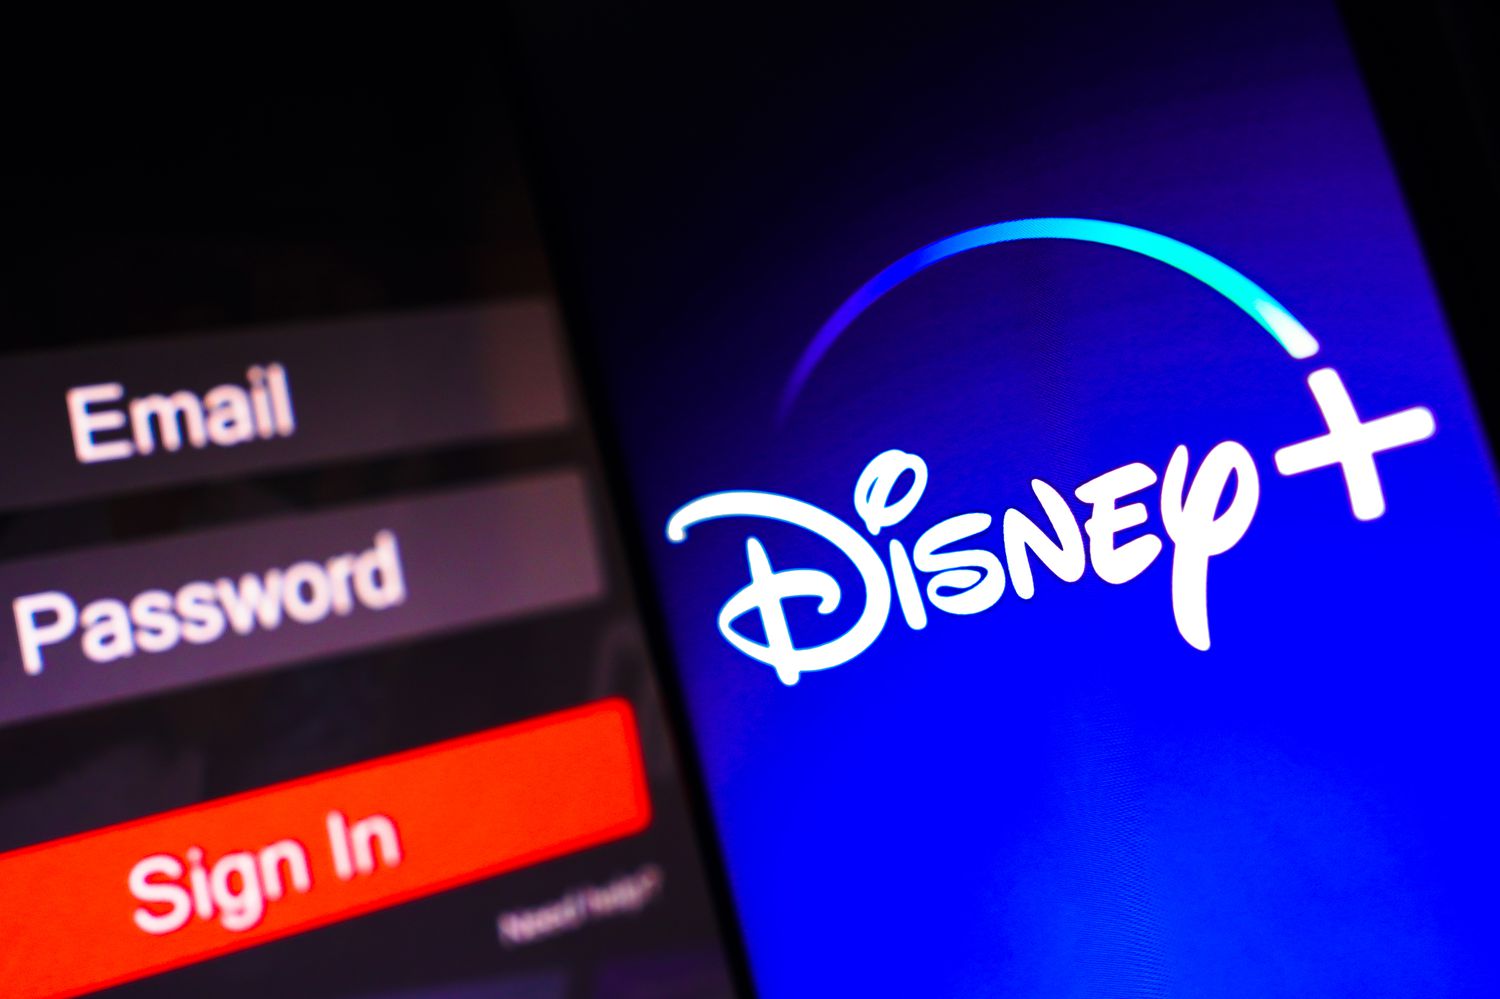 Disney+ To Join Netflix in Password Sharing Crackdown, CEO Bob Iger Says [Video]